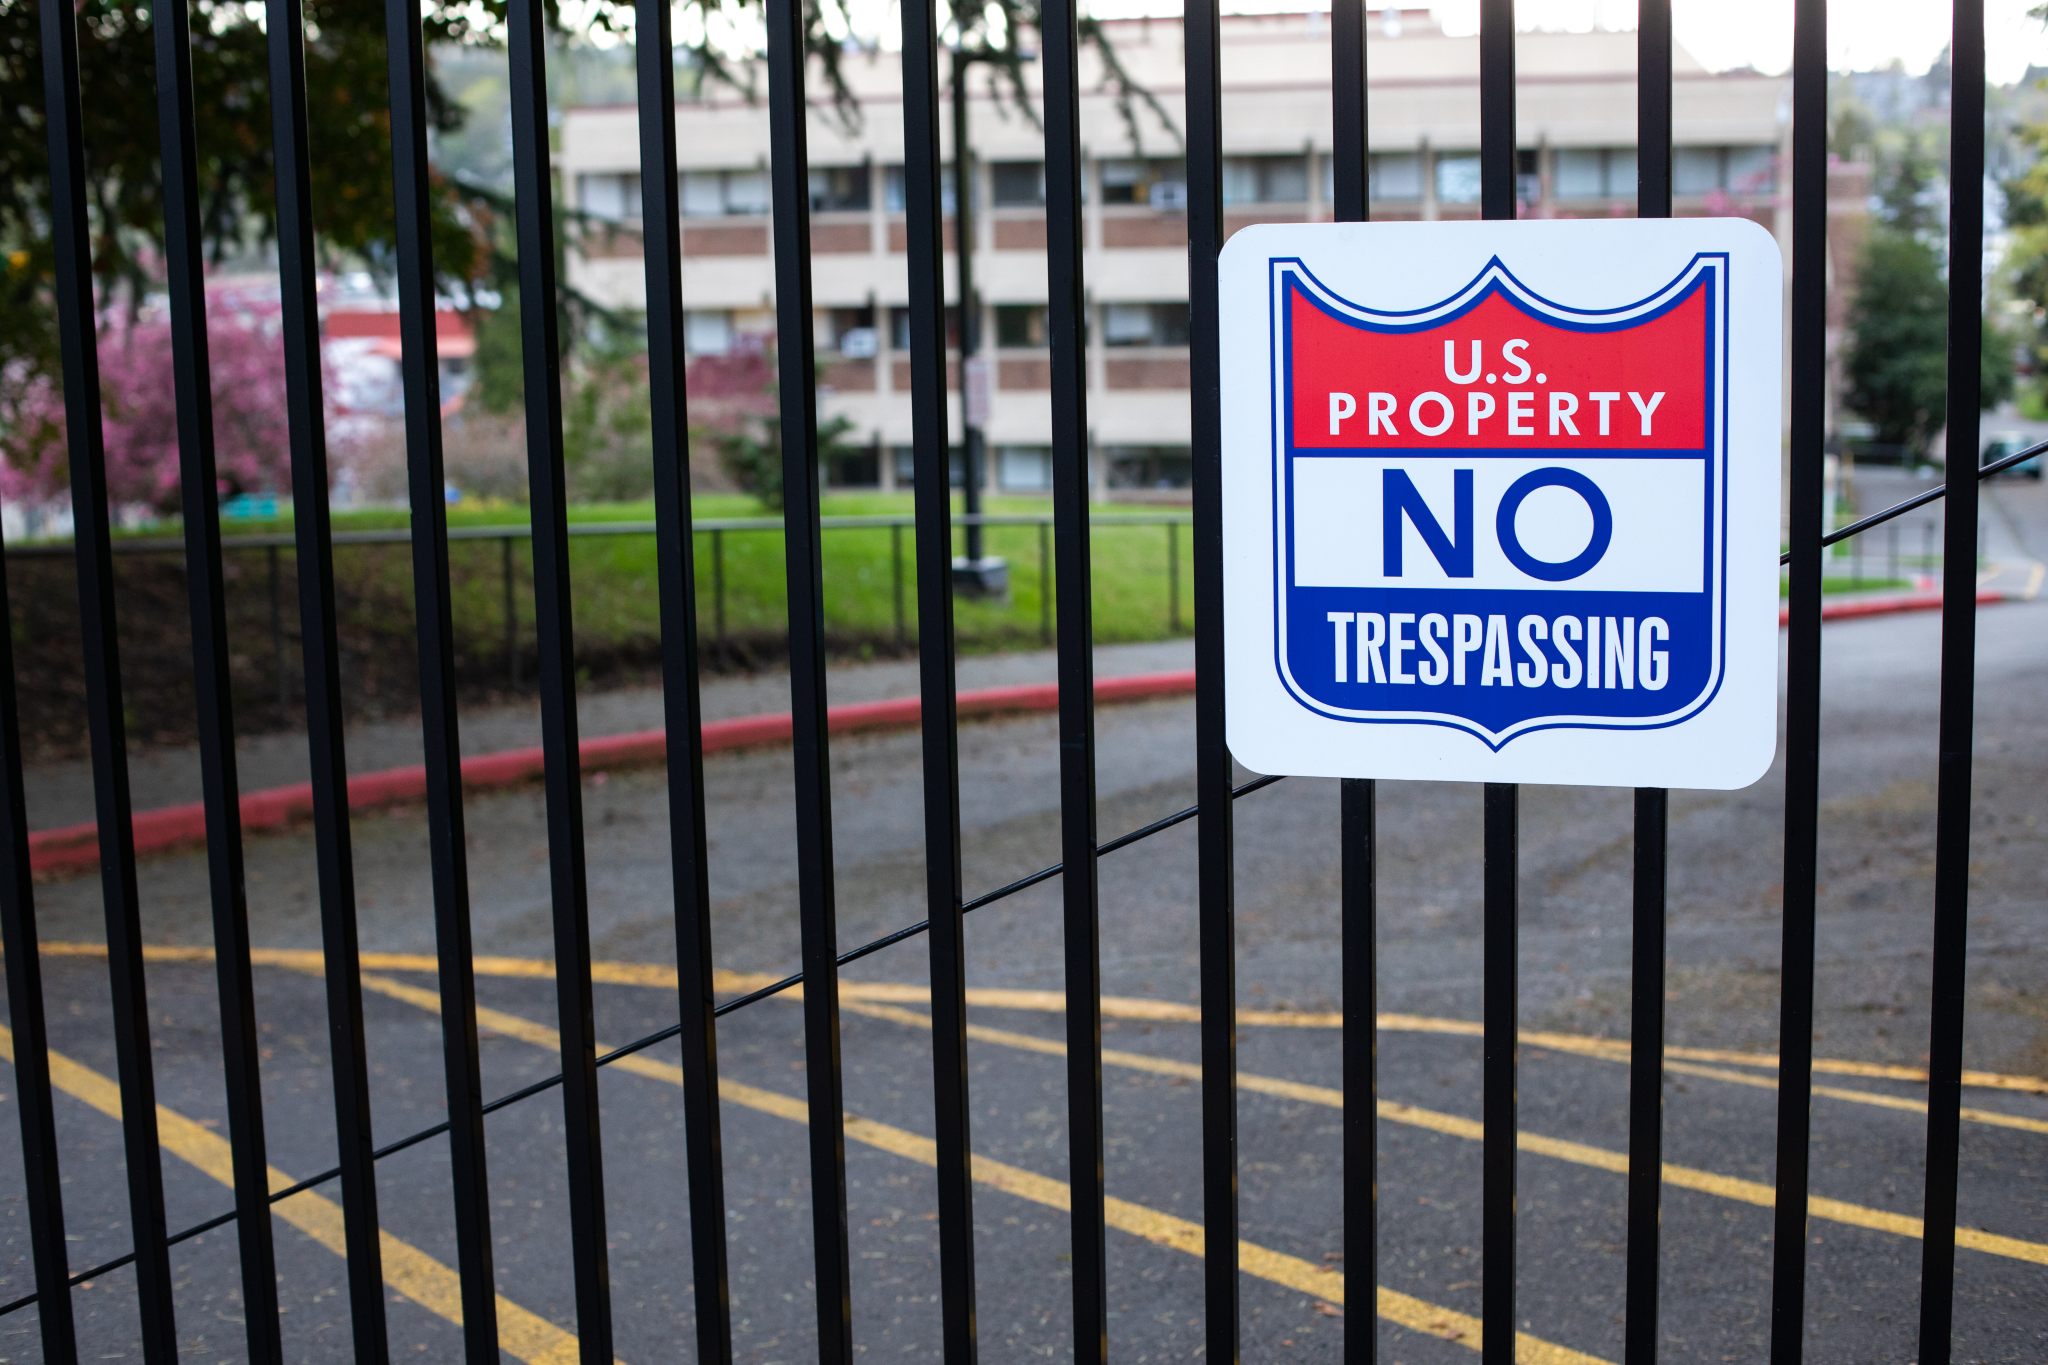 exterior photo of a gate with a U.S. Property no trespassing sign on the gate